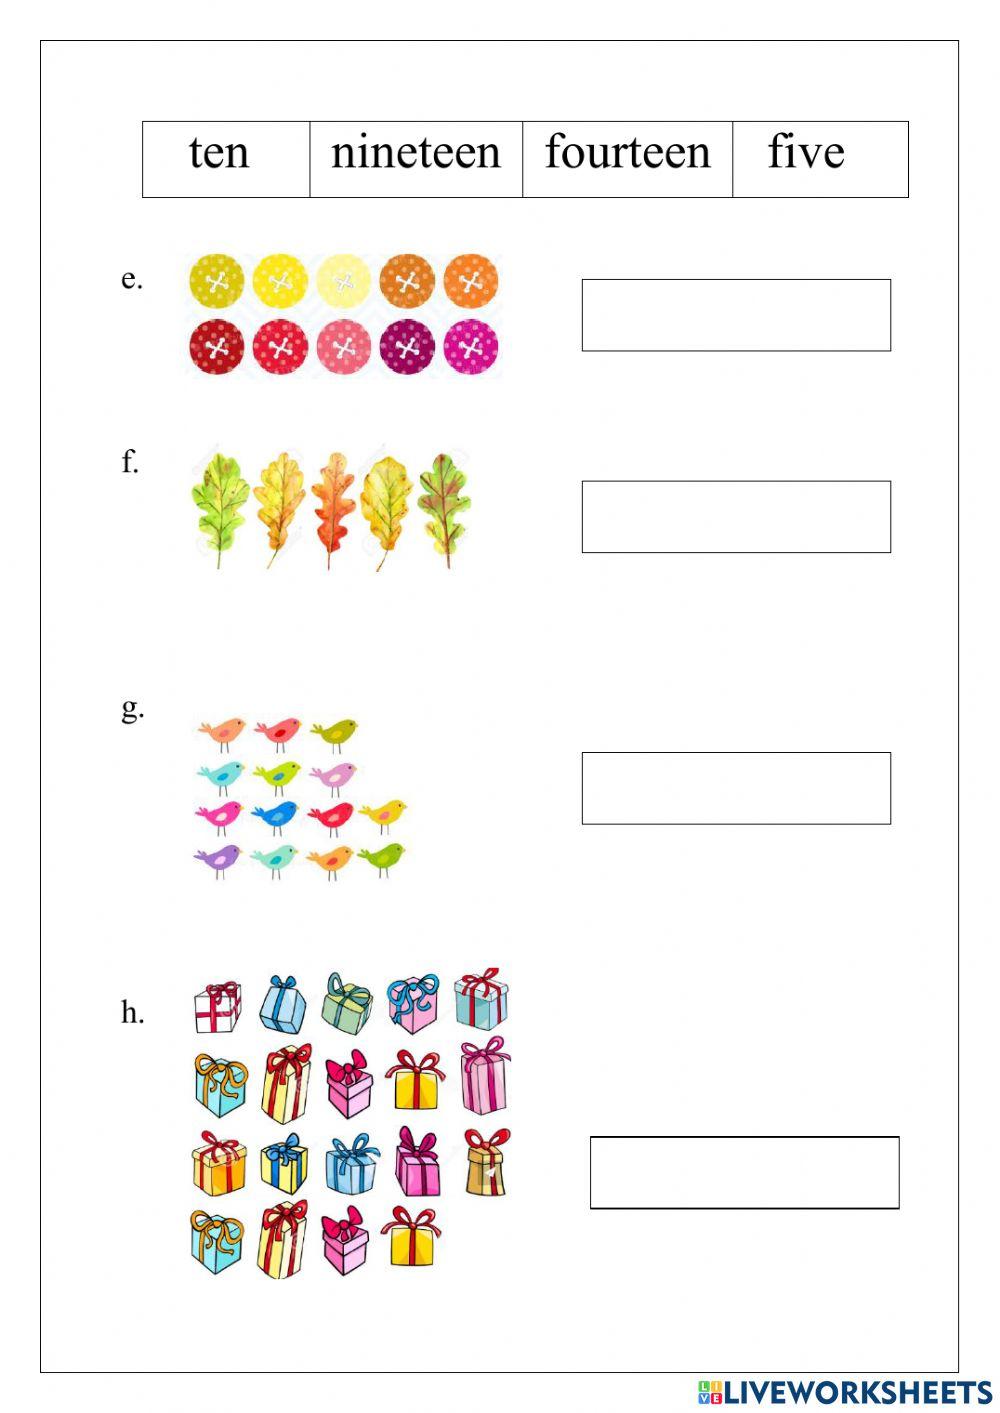 August (9th - 13th) Numeracy Live worksheet